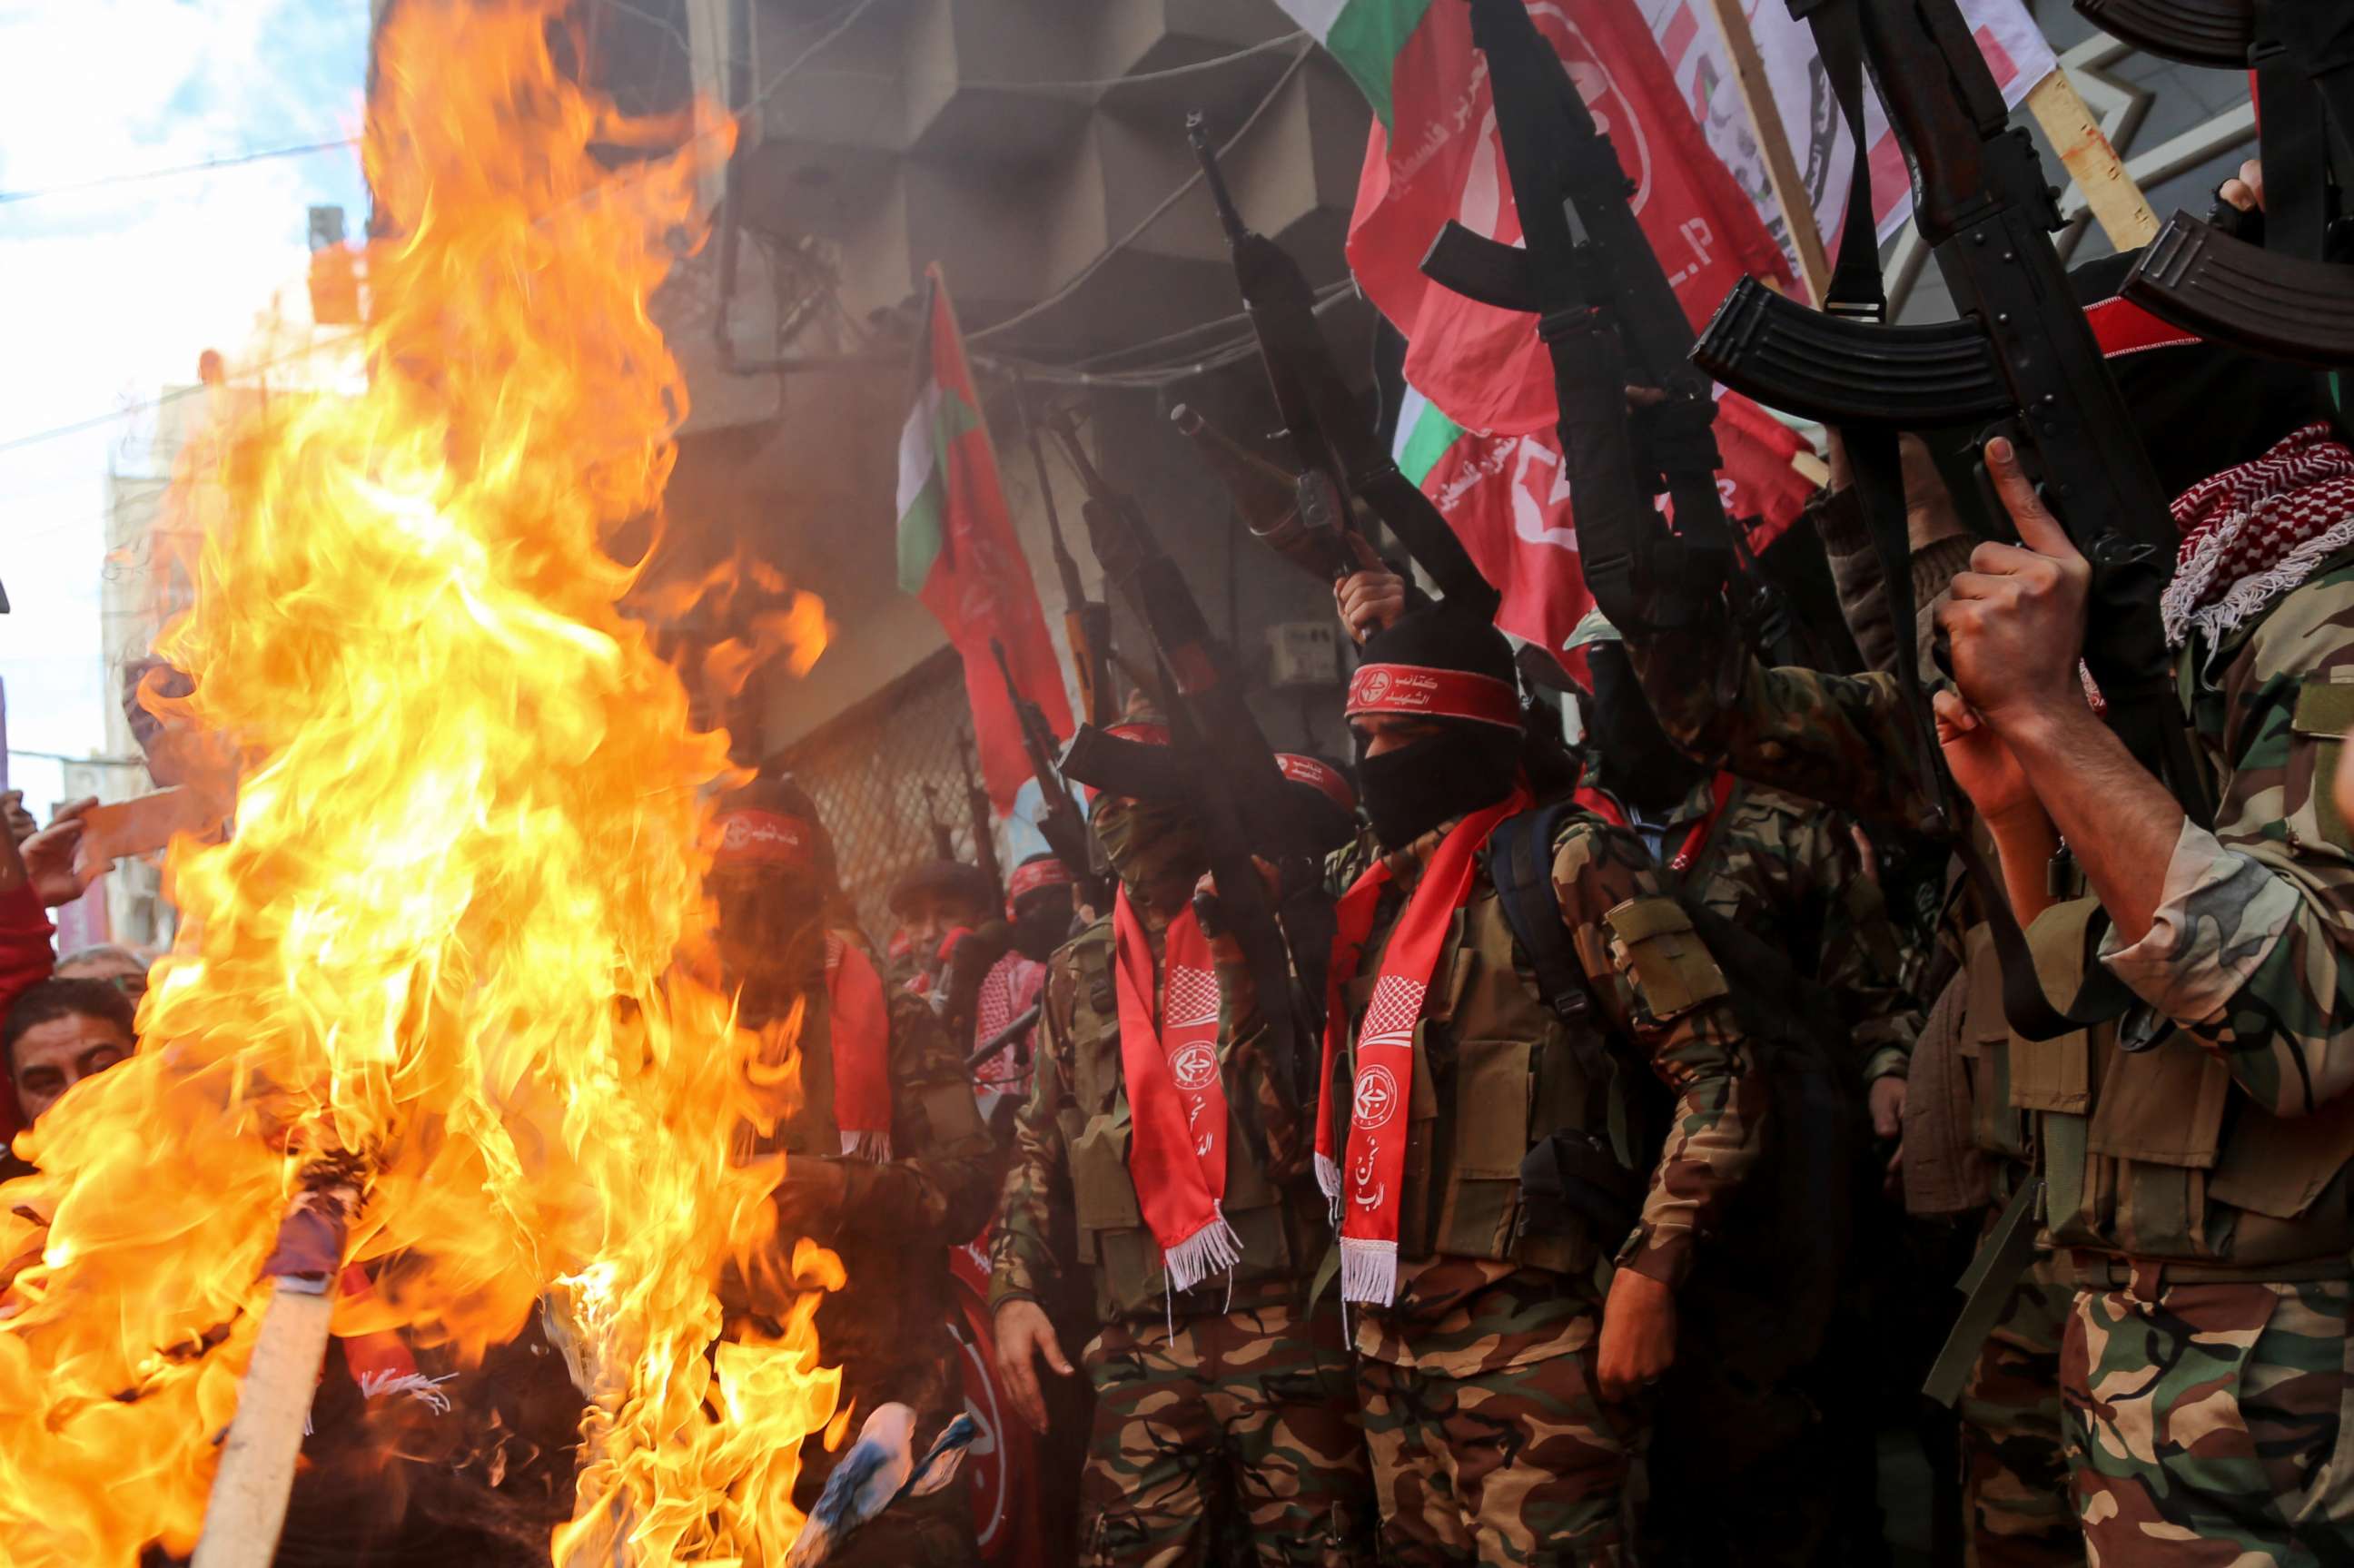 PHOTO: Palestinian Territories: Palestinian militants from the Popular Front for the Liberation of Palestine (PFLP) take part in a protest following Trump's decision to recognize Jerusalem as the capital of Israel, in Gaza City, Dec. 7, 2017. 